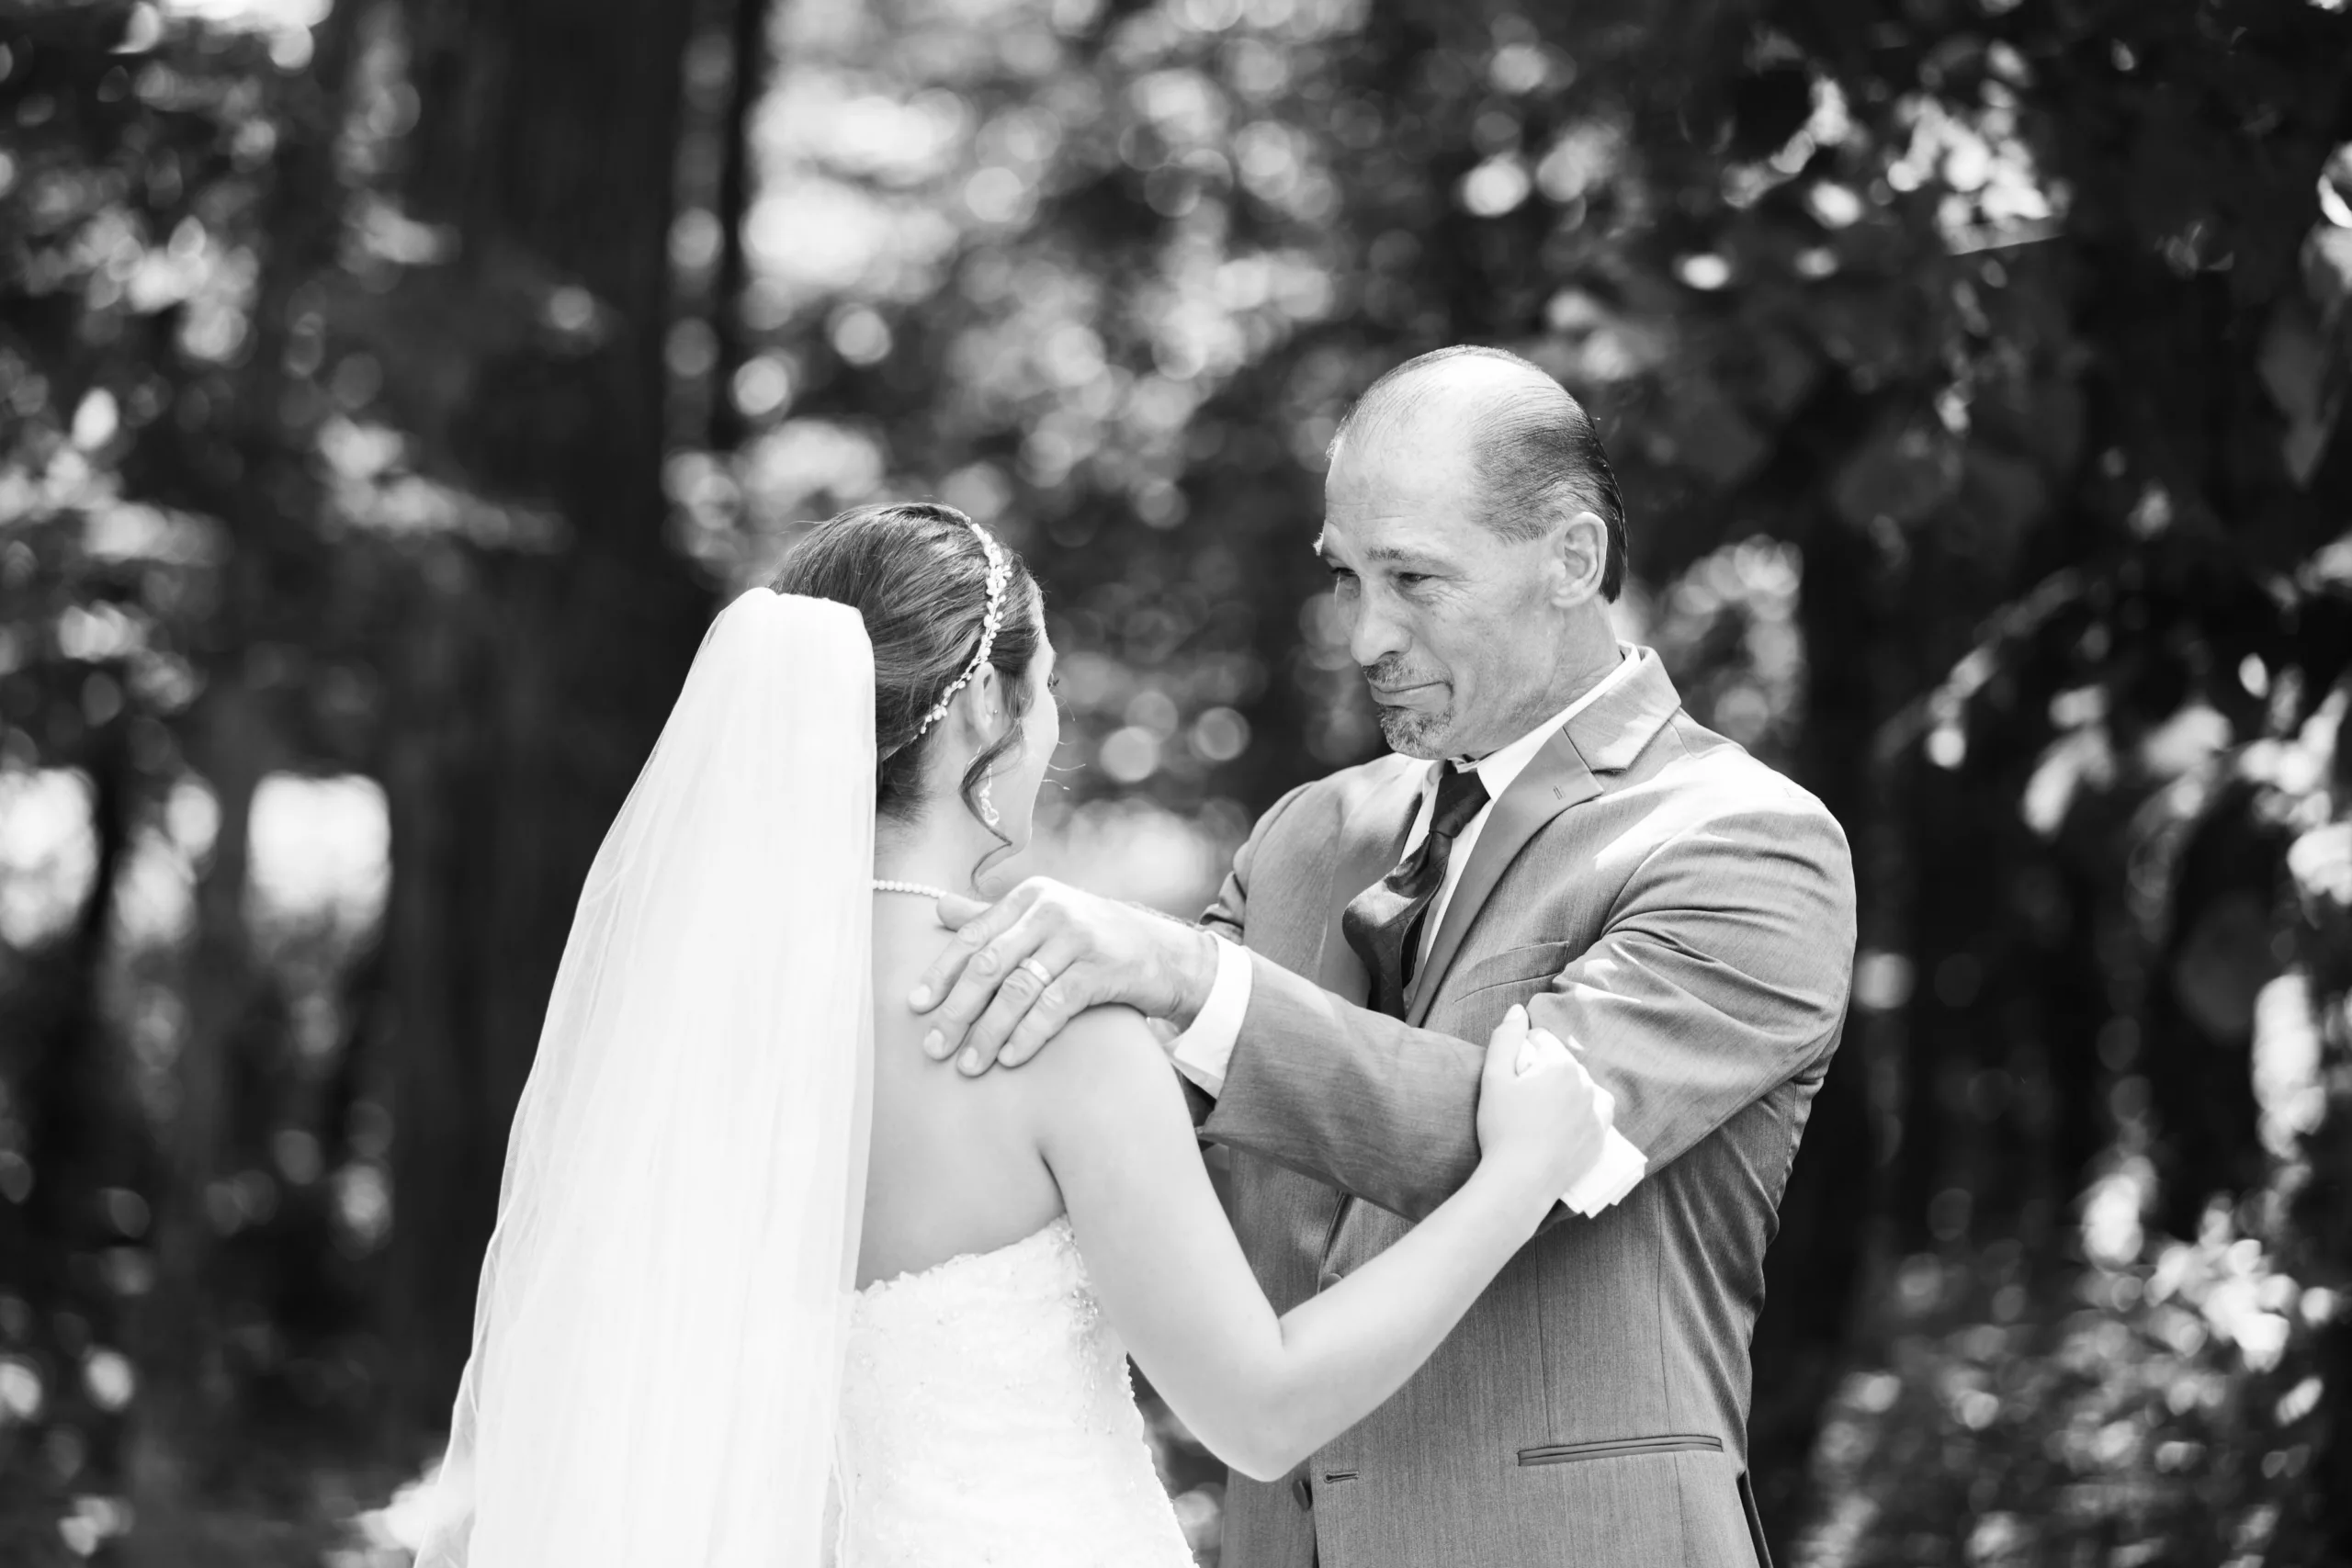 Candid moment between dad and bride at Country Lane Lodge in Adel Iowa 